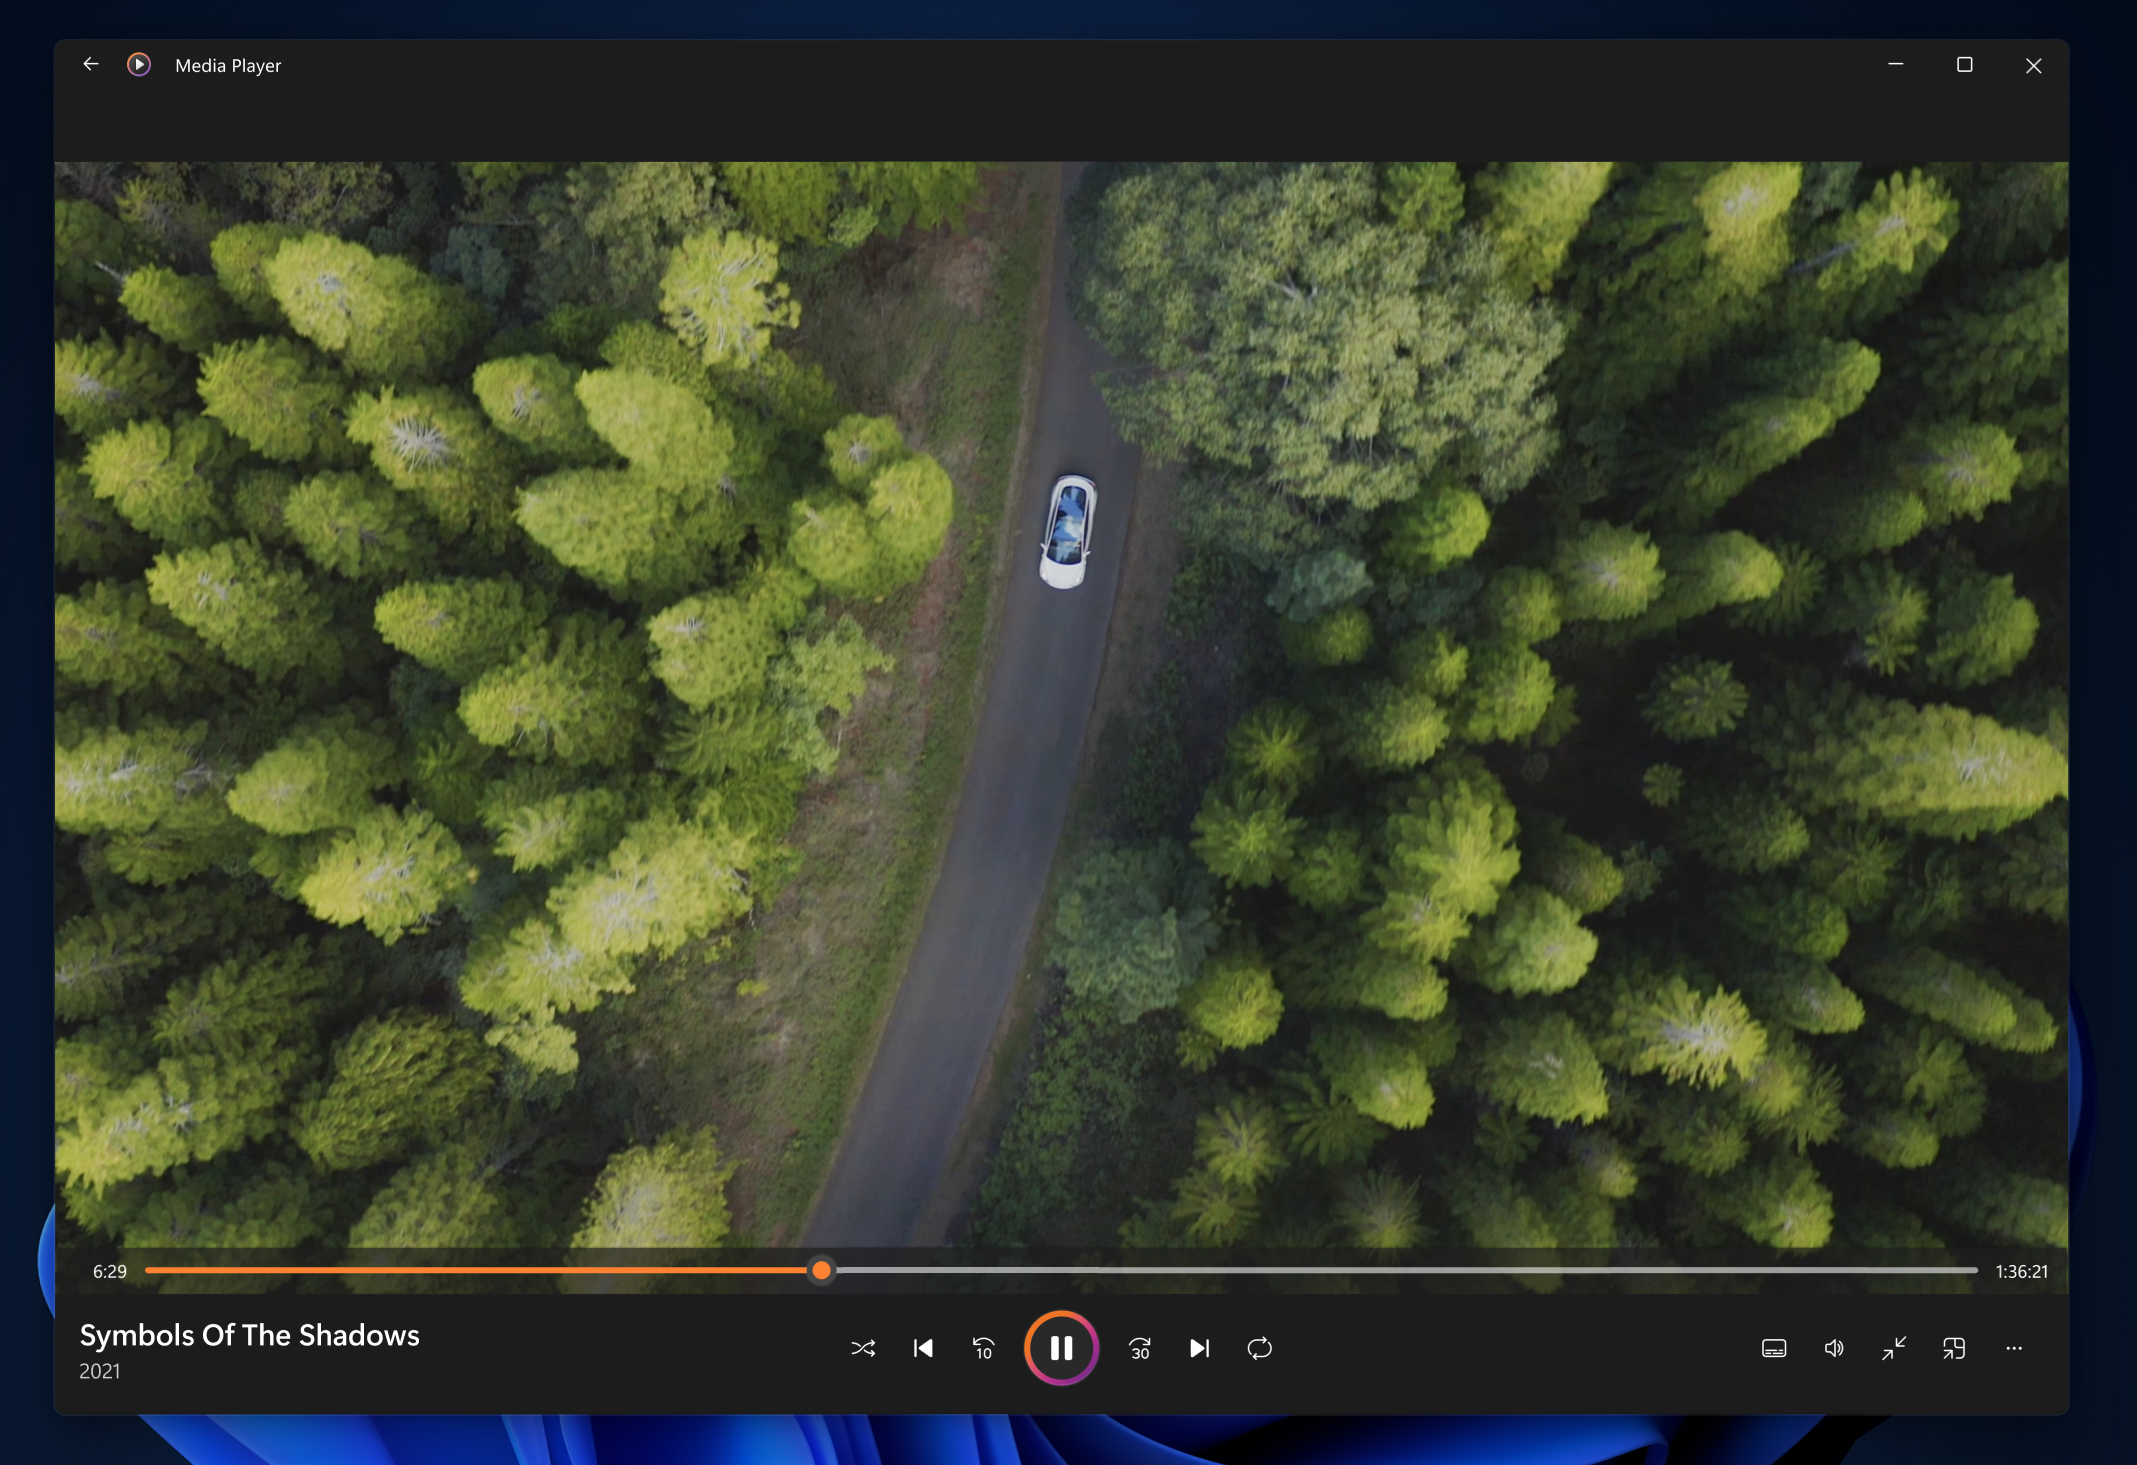 Windows 11 is Getting A New Media Player - 32